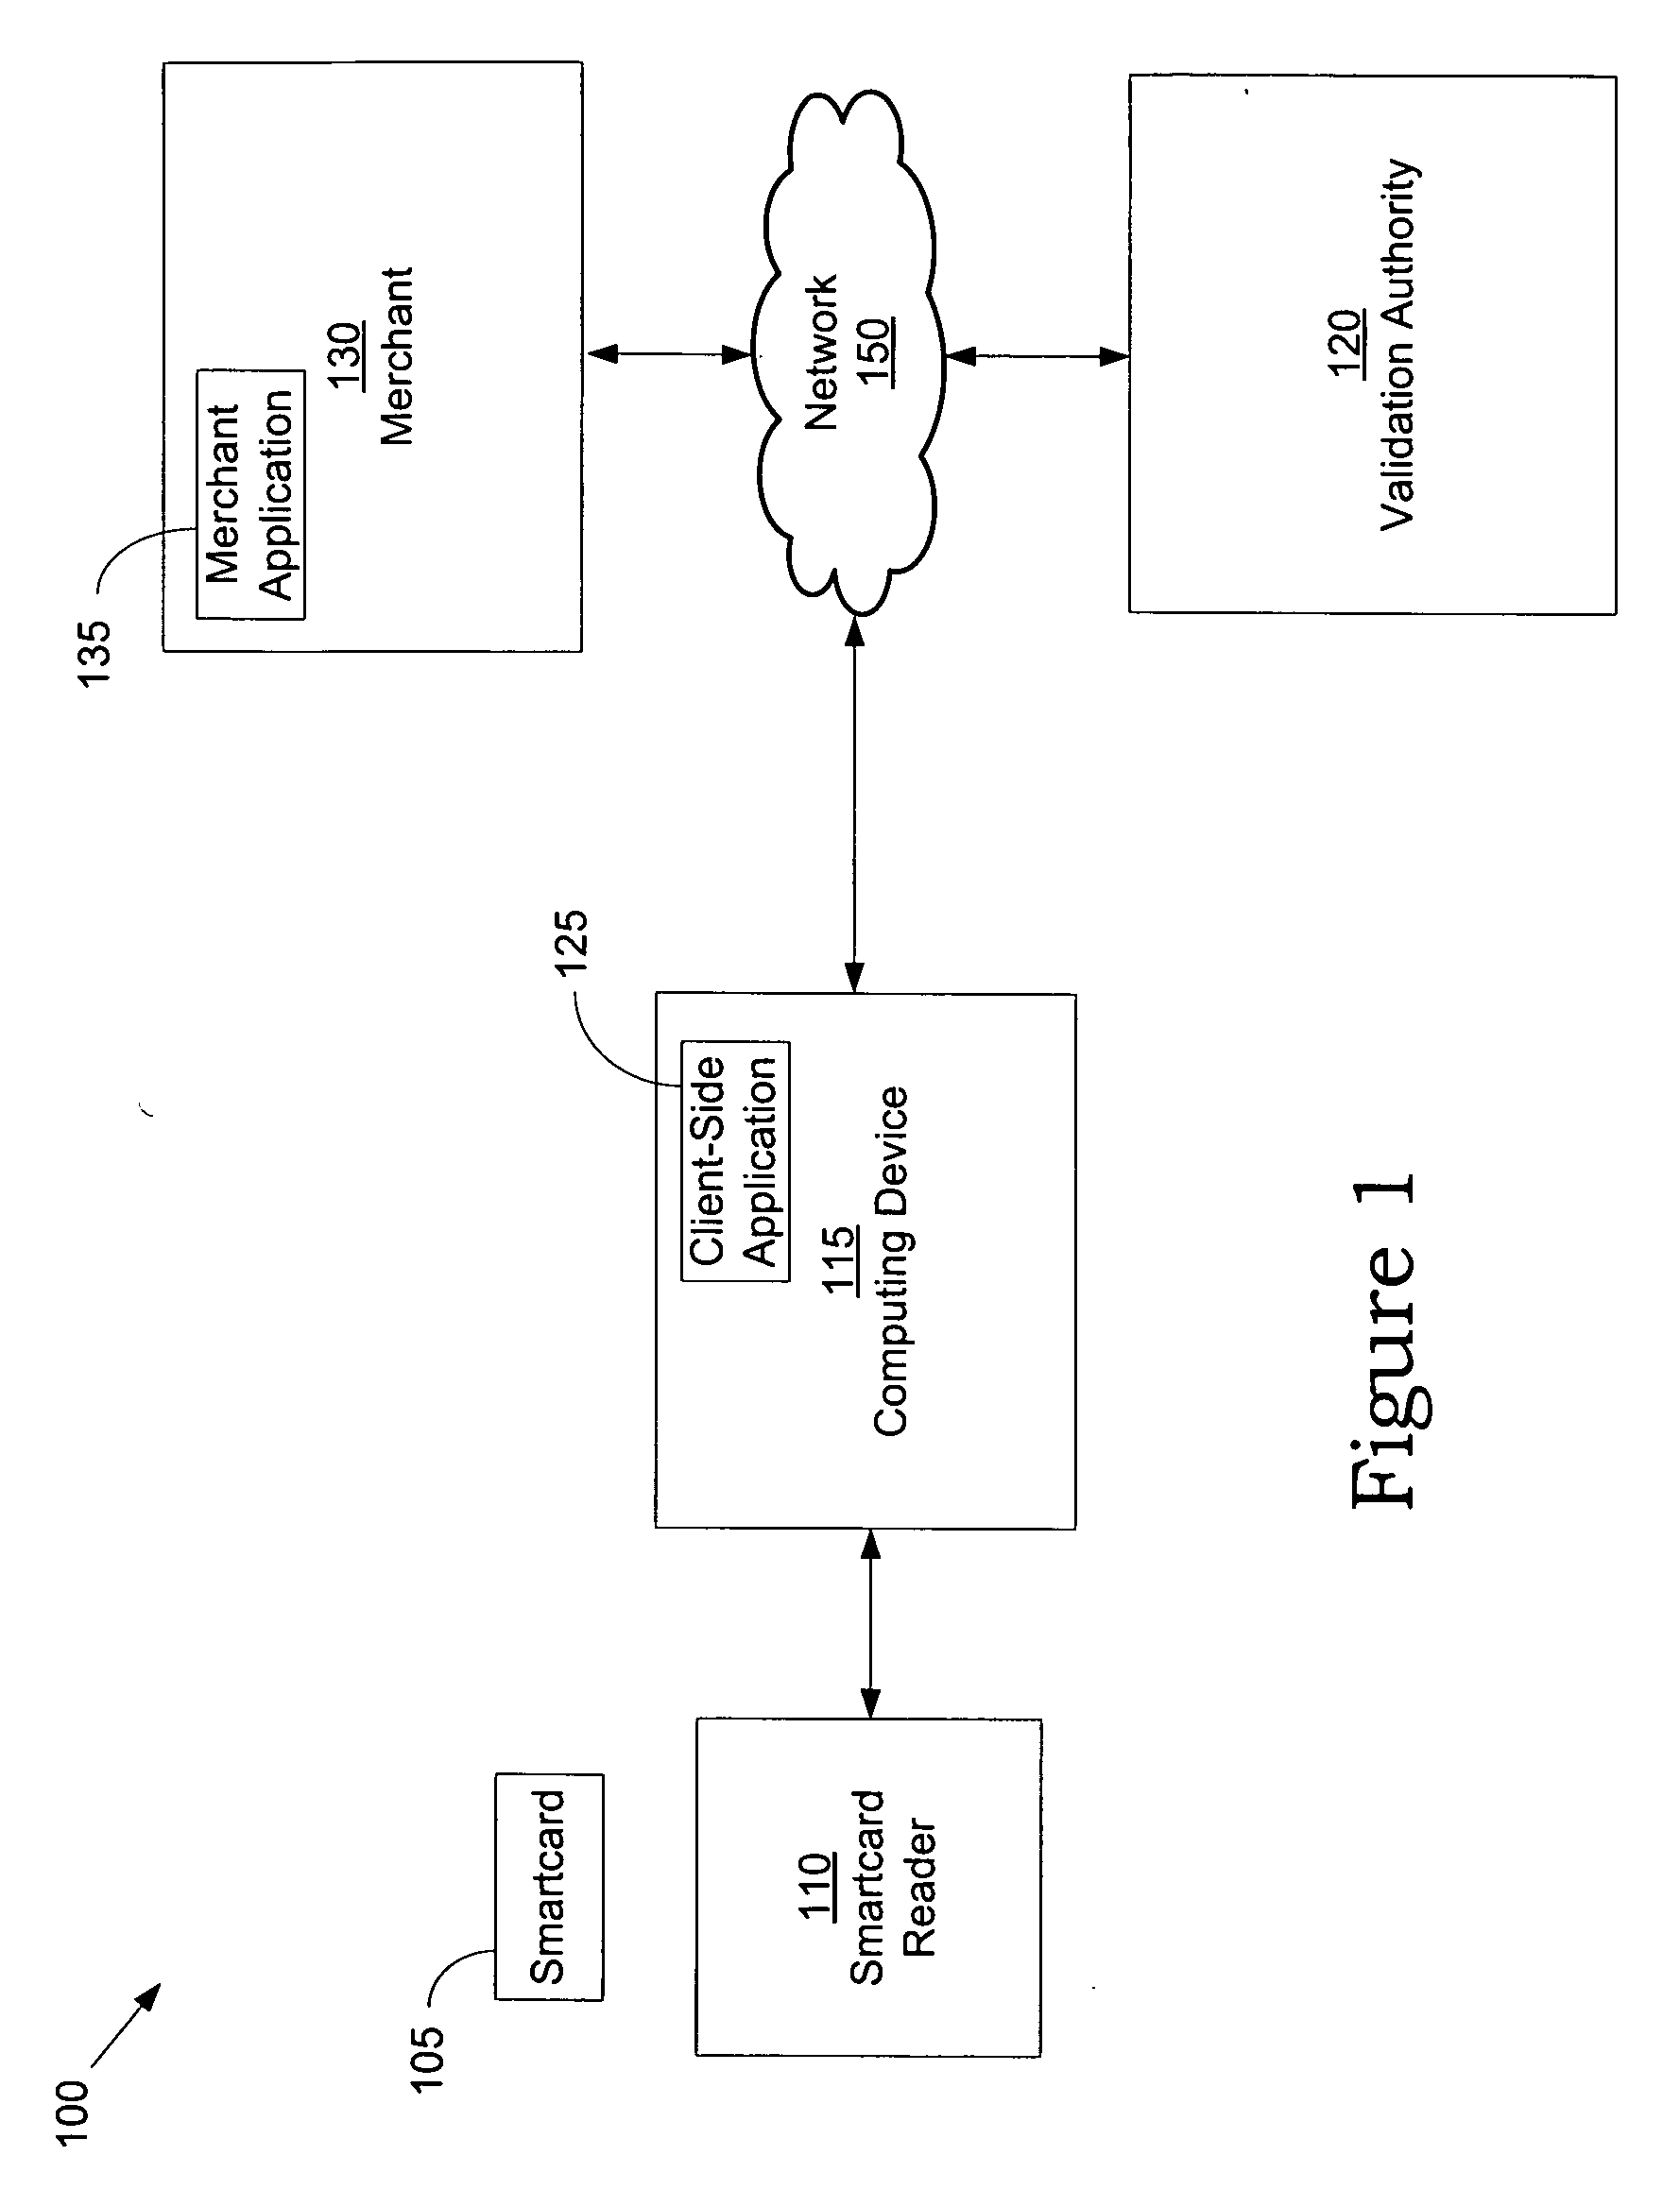 System and method for performing payment transactions, verifying age, verifying identity, and managing taxes